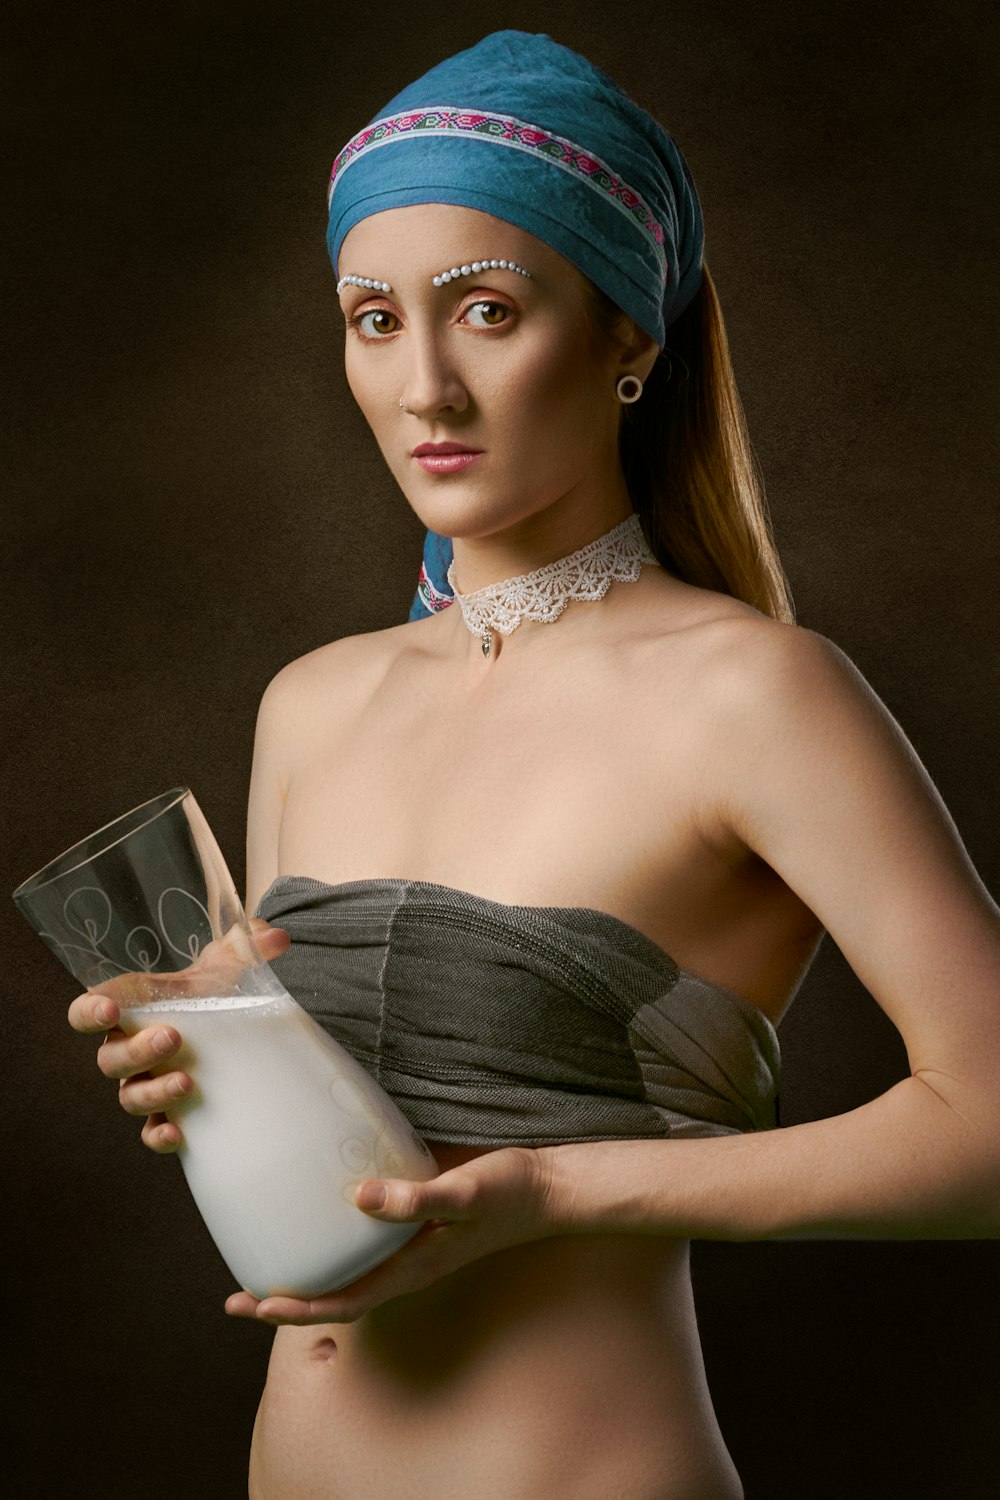 woman holding pitcher of glass